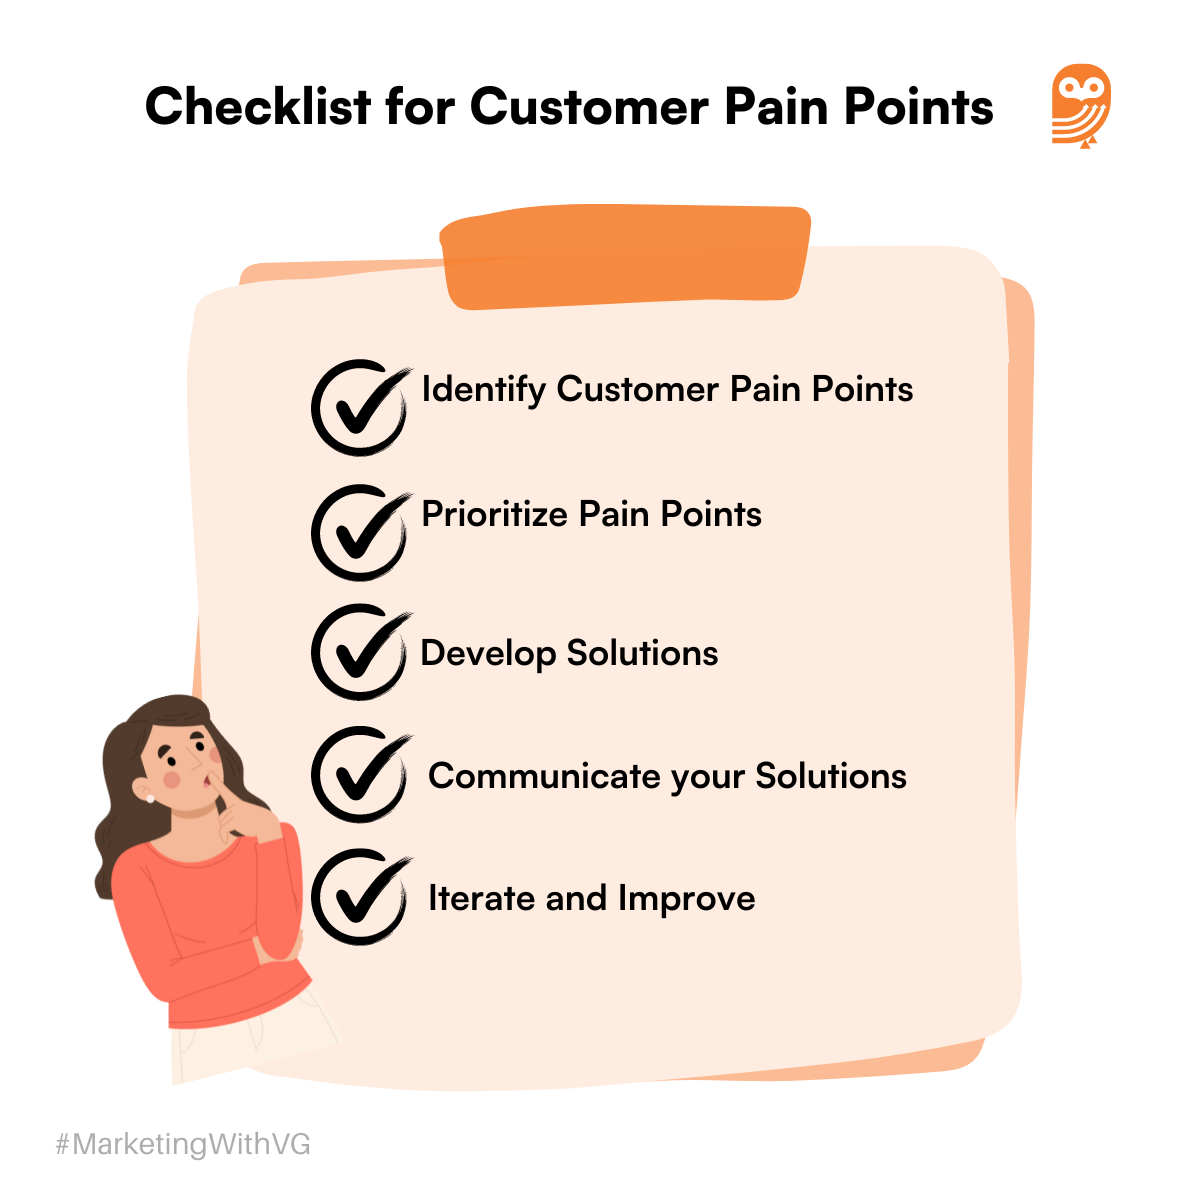 Checklist for customer pain points